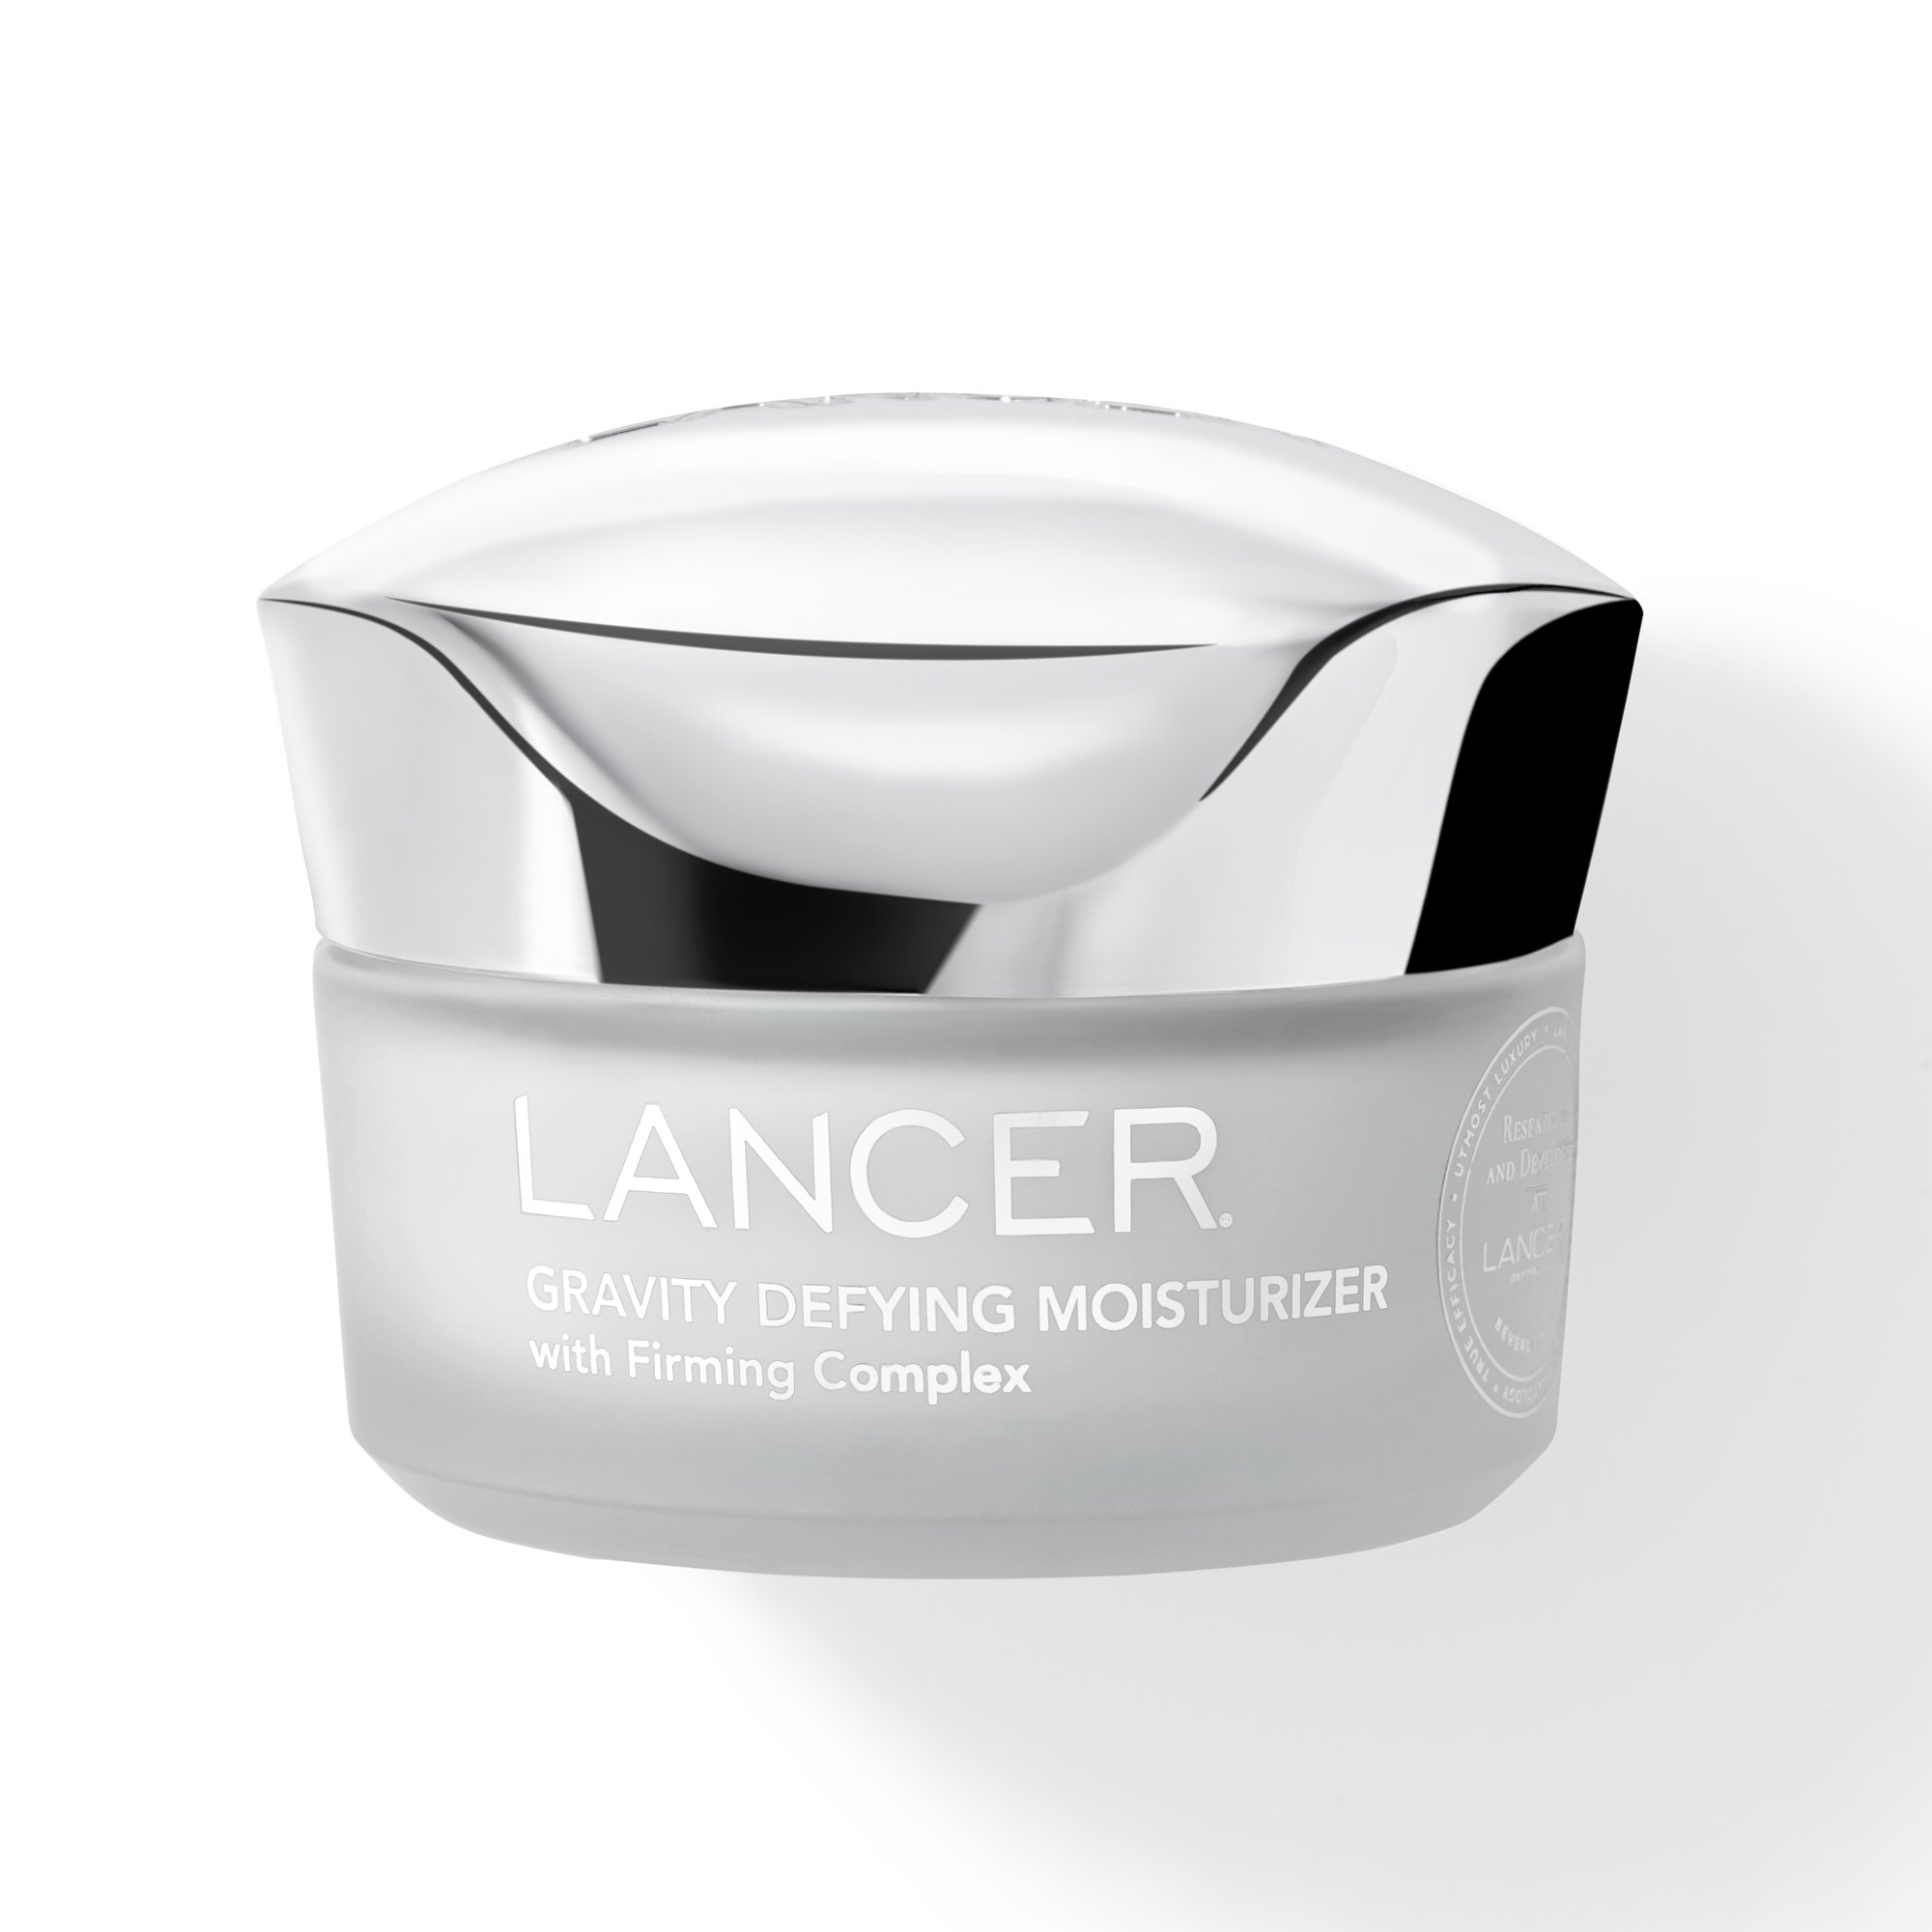 Gravity Defying Moisturizer with Firming Complex